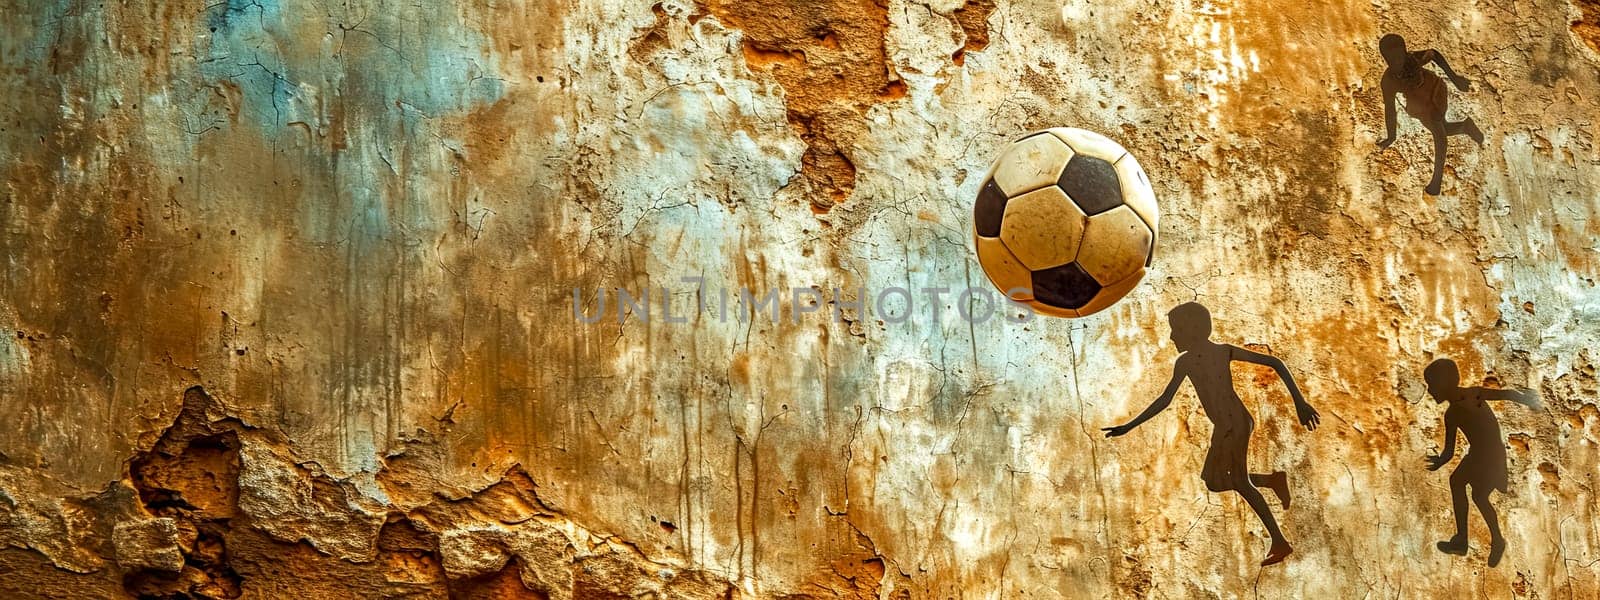 soccer play with silhouetted players and a ball against a rustic, aged wall, merging sports with a vintage aesthetic. by Edophoto